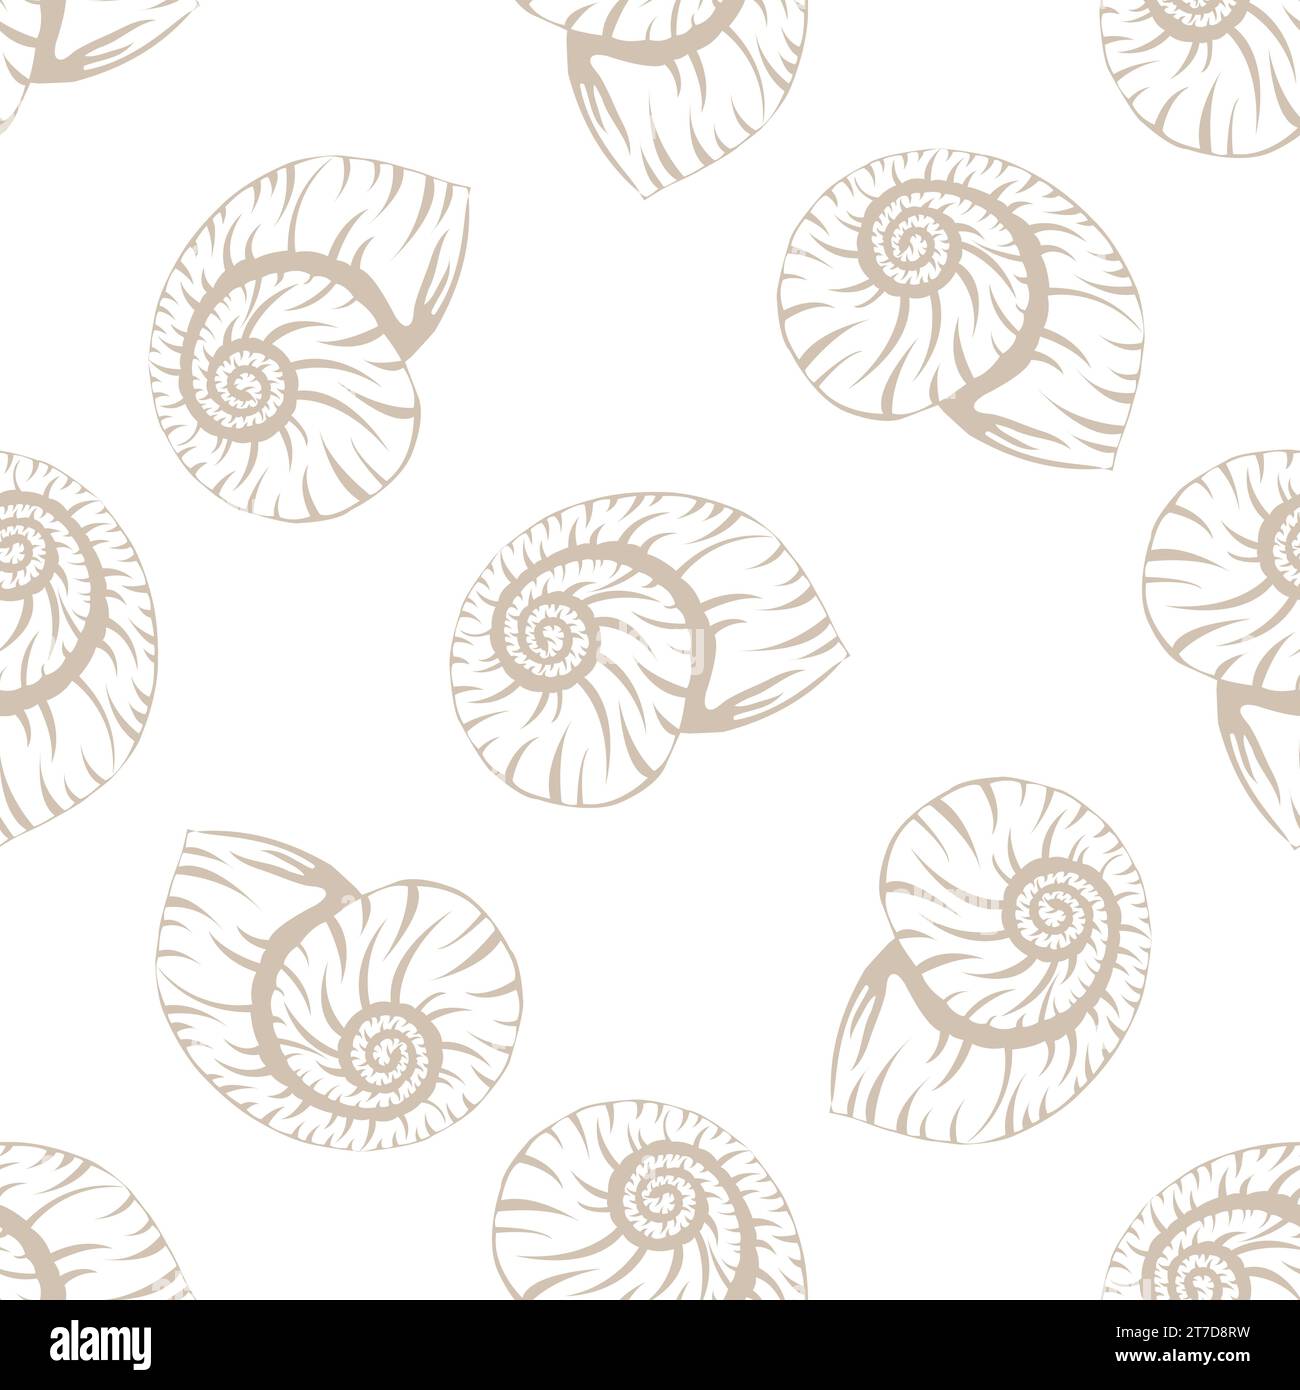 Seamless pattern with shells. Background with seashell on white. Texture of a tropical sea mollusk or snail with a spiral shell. Vector illustration. Stock Vector